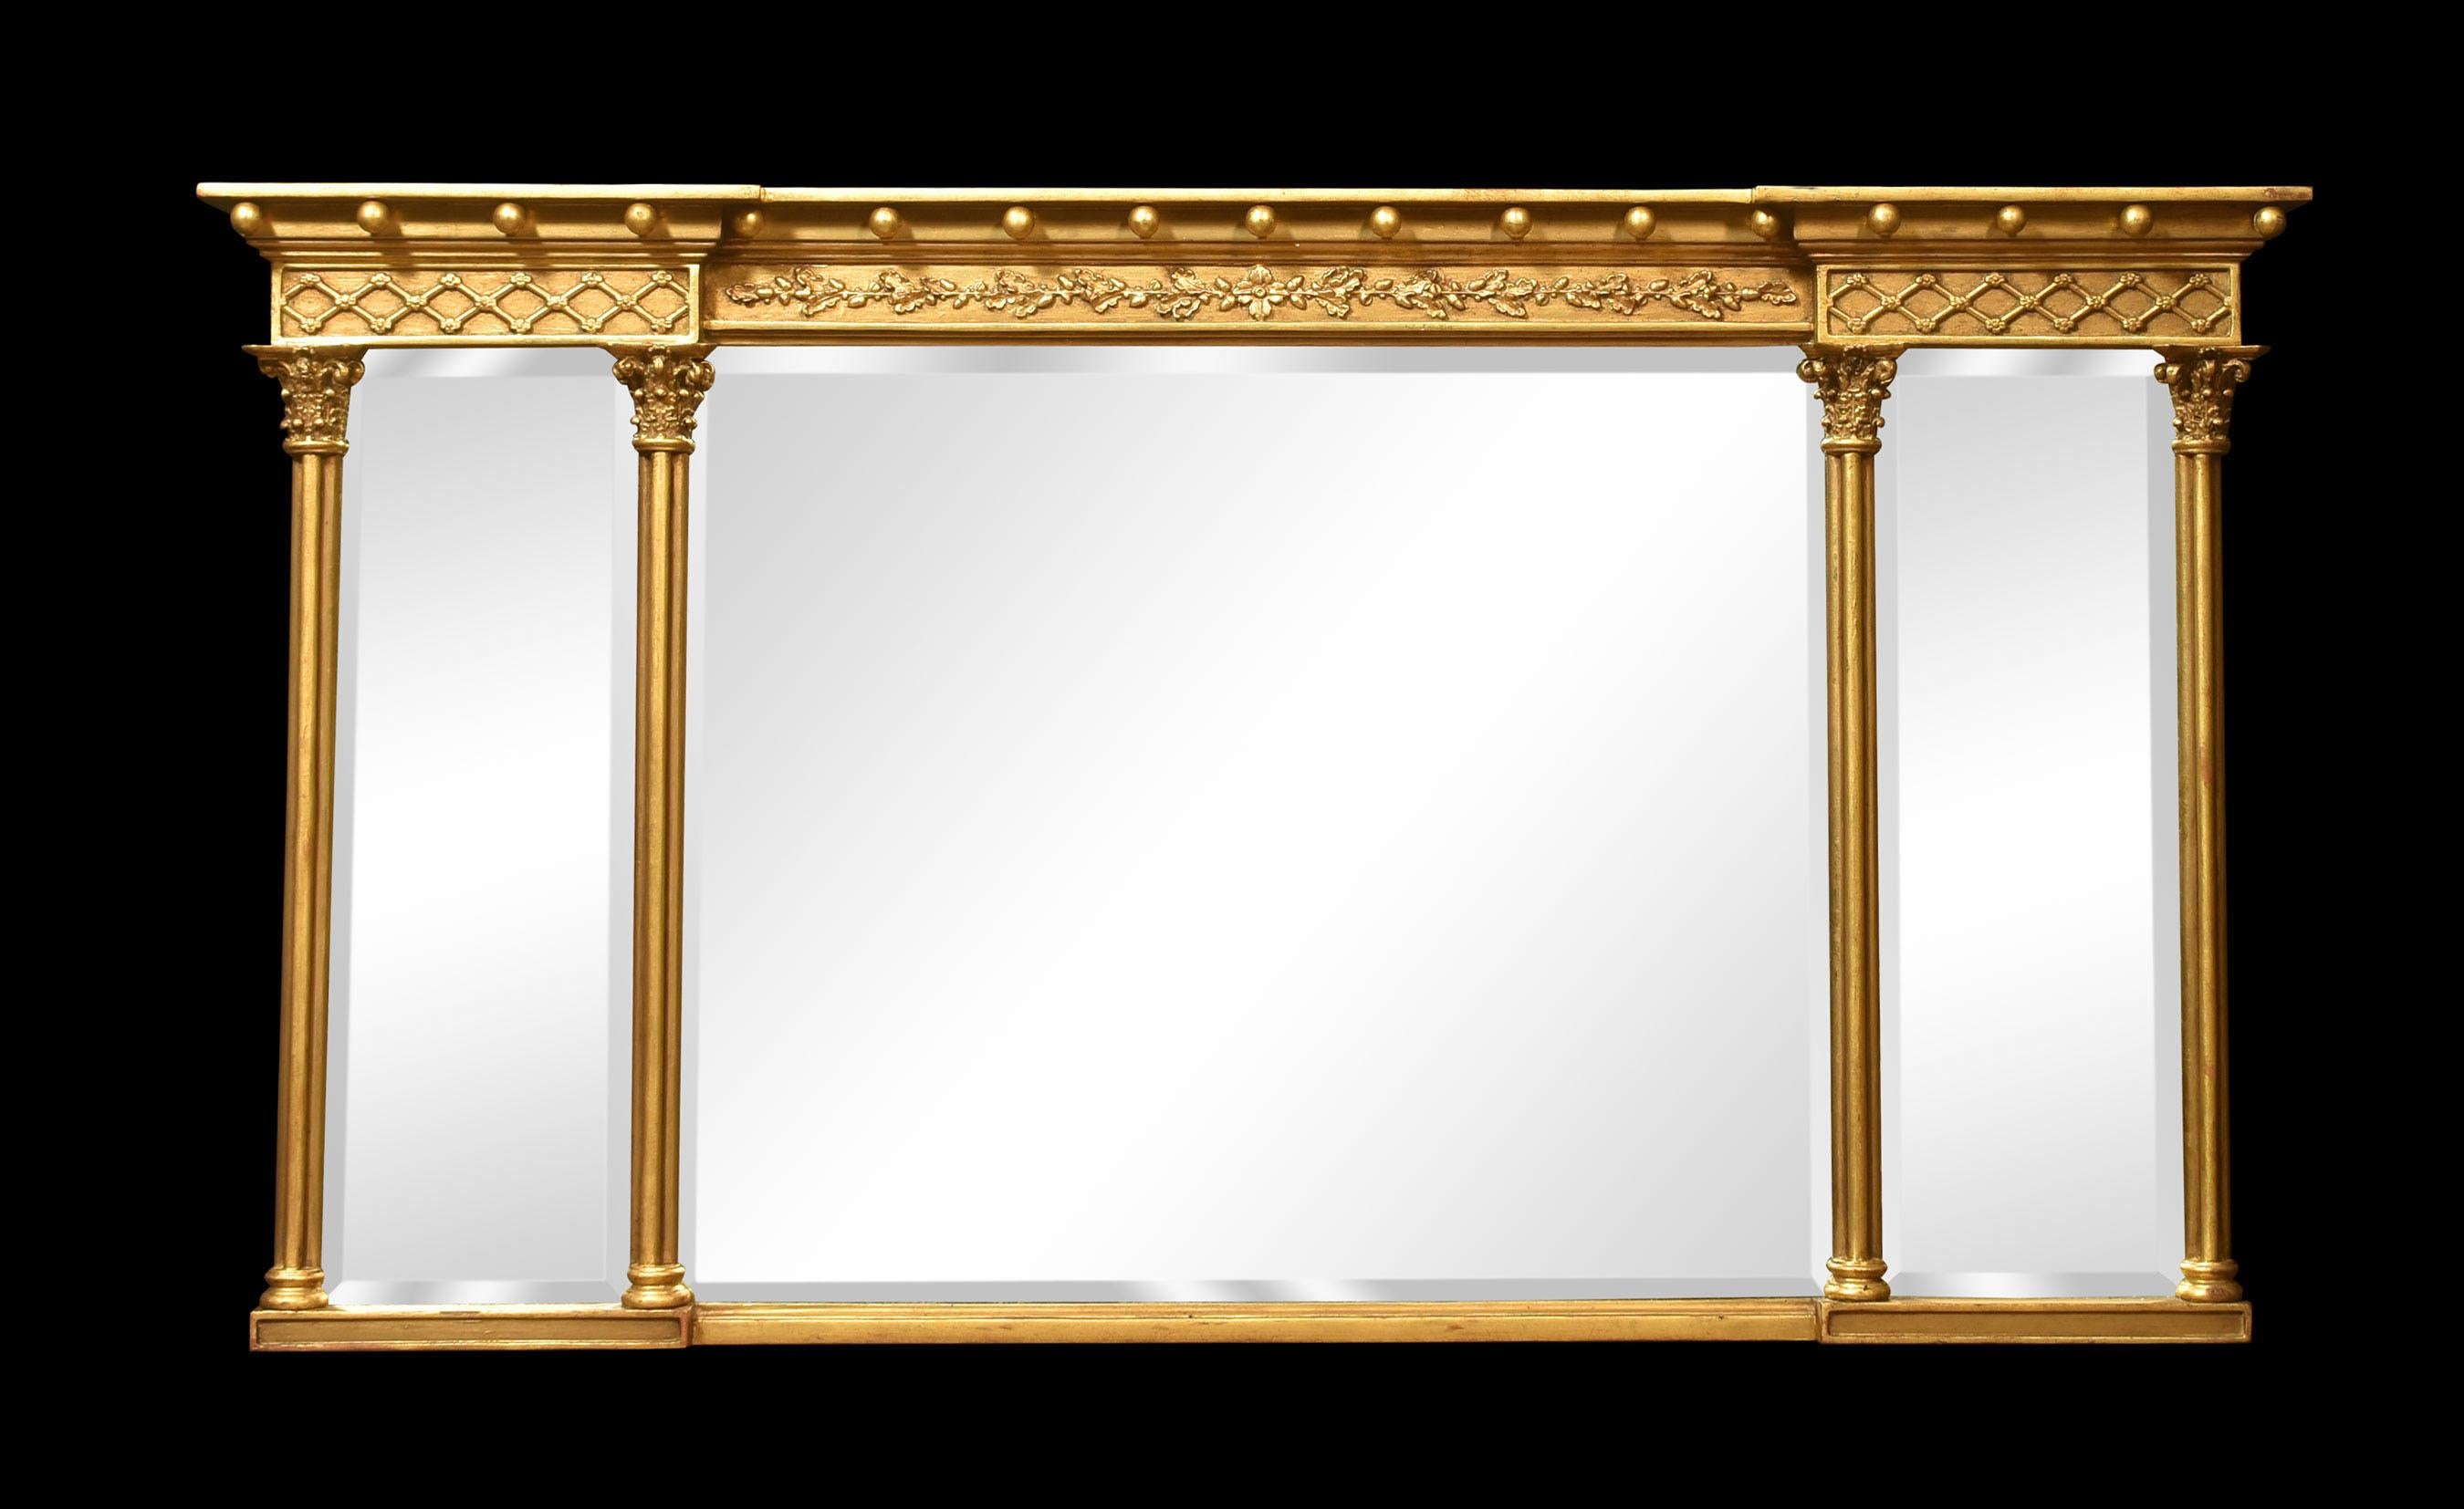 Gilded overmantel mirror, the projecting molded cornice with ball detail above a relief decorated frieze. To the three beveled mirror plates flanked by reeded half pilasters.
Dimensions
Height 33.5 Inches
Width 60.5 Inches
Depth 4 Inches.